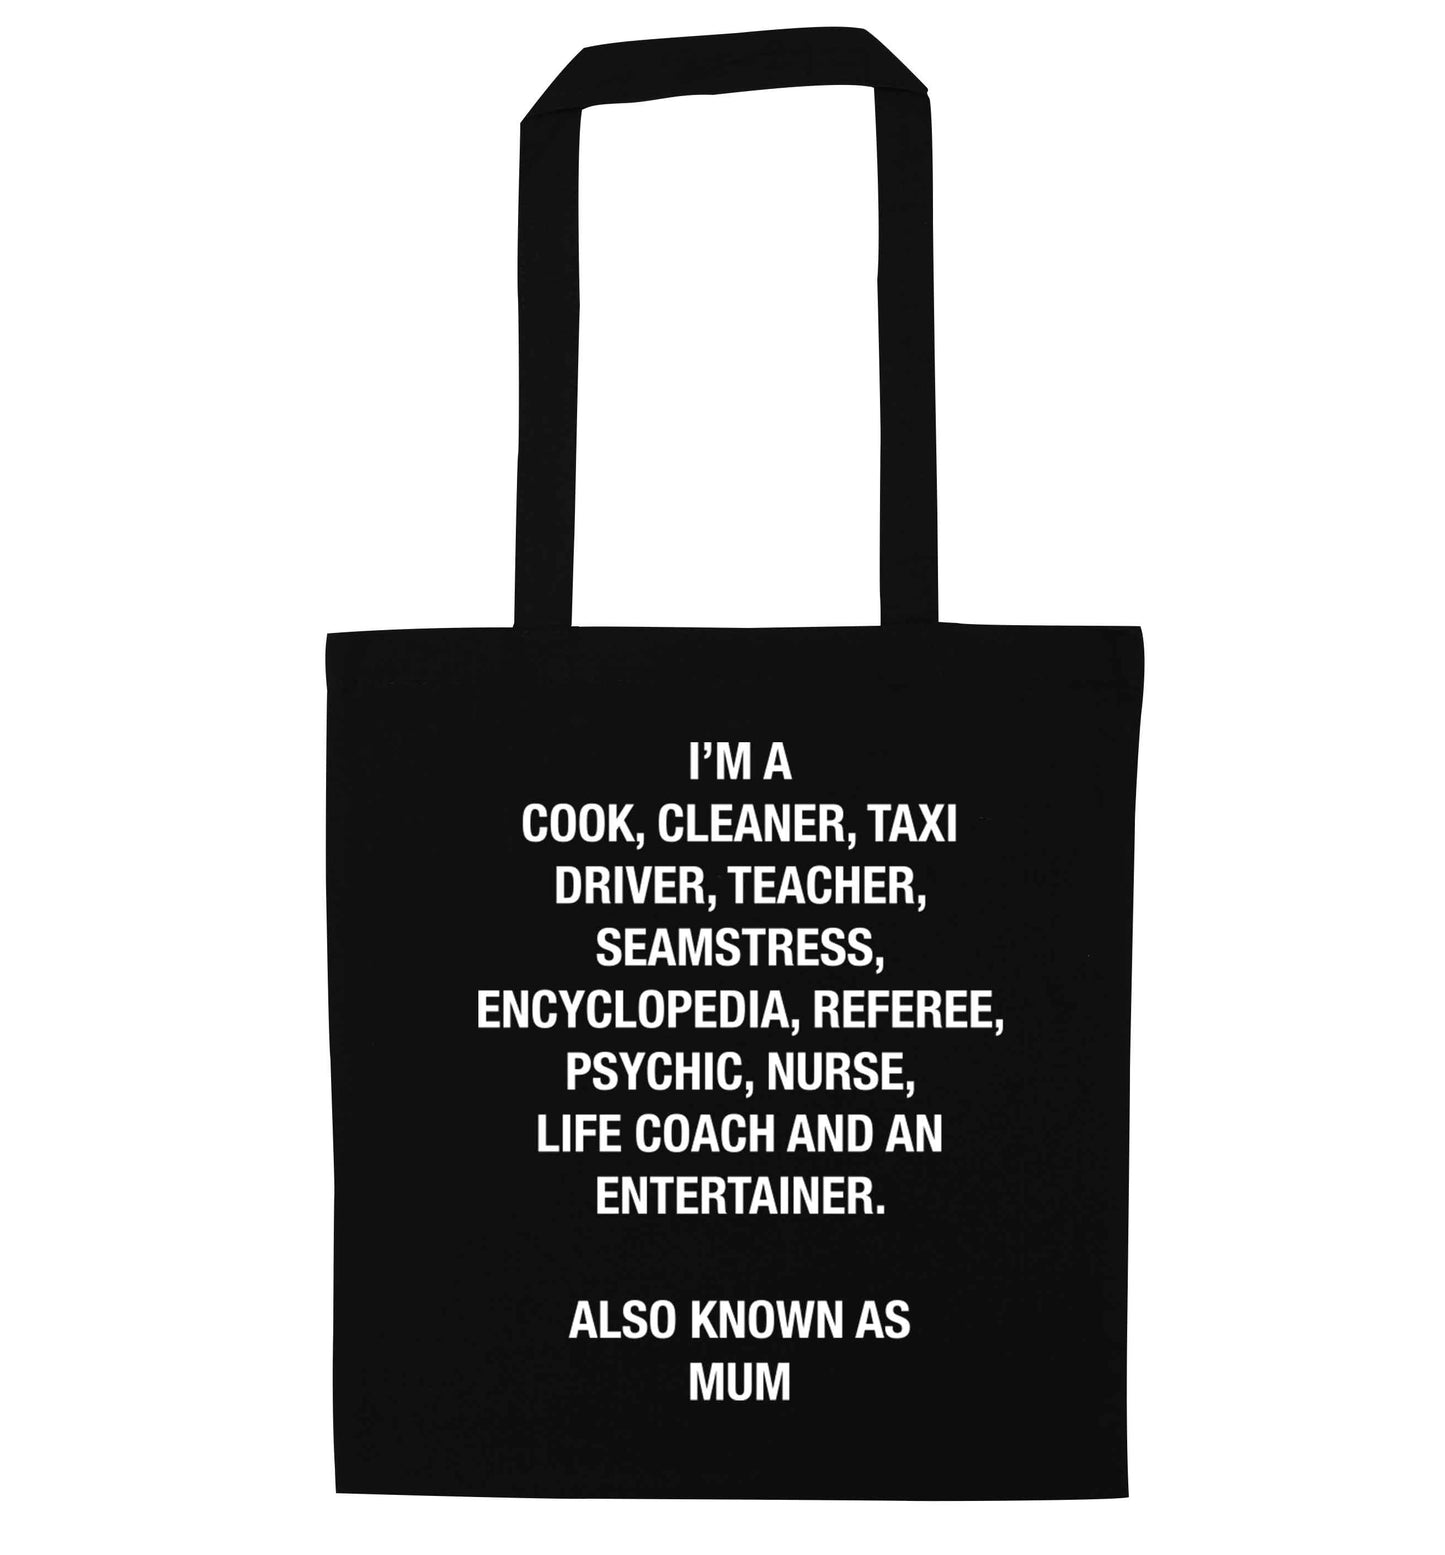 Funny gifts for your mum on mother's dayor her birthday! Mum, cook, cleaner, taxi driver, teacher, seamstress, encyclopedia, referee, psychic, nurse, life coach and entertainer black tote bag